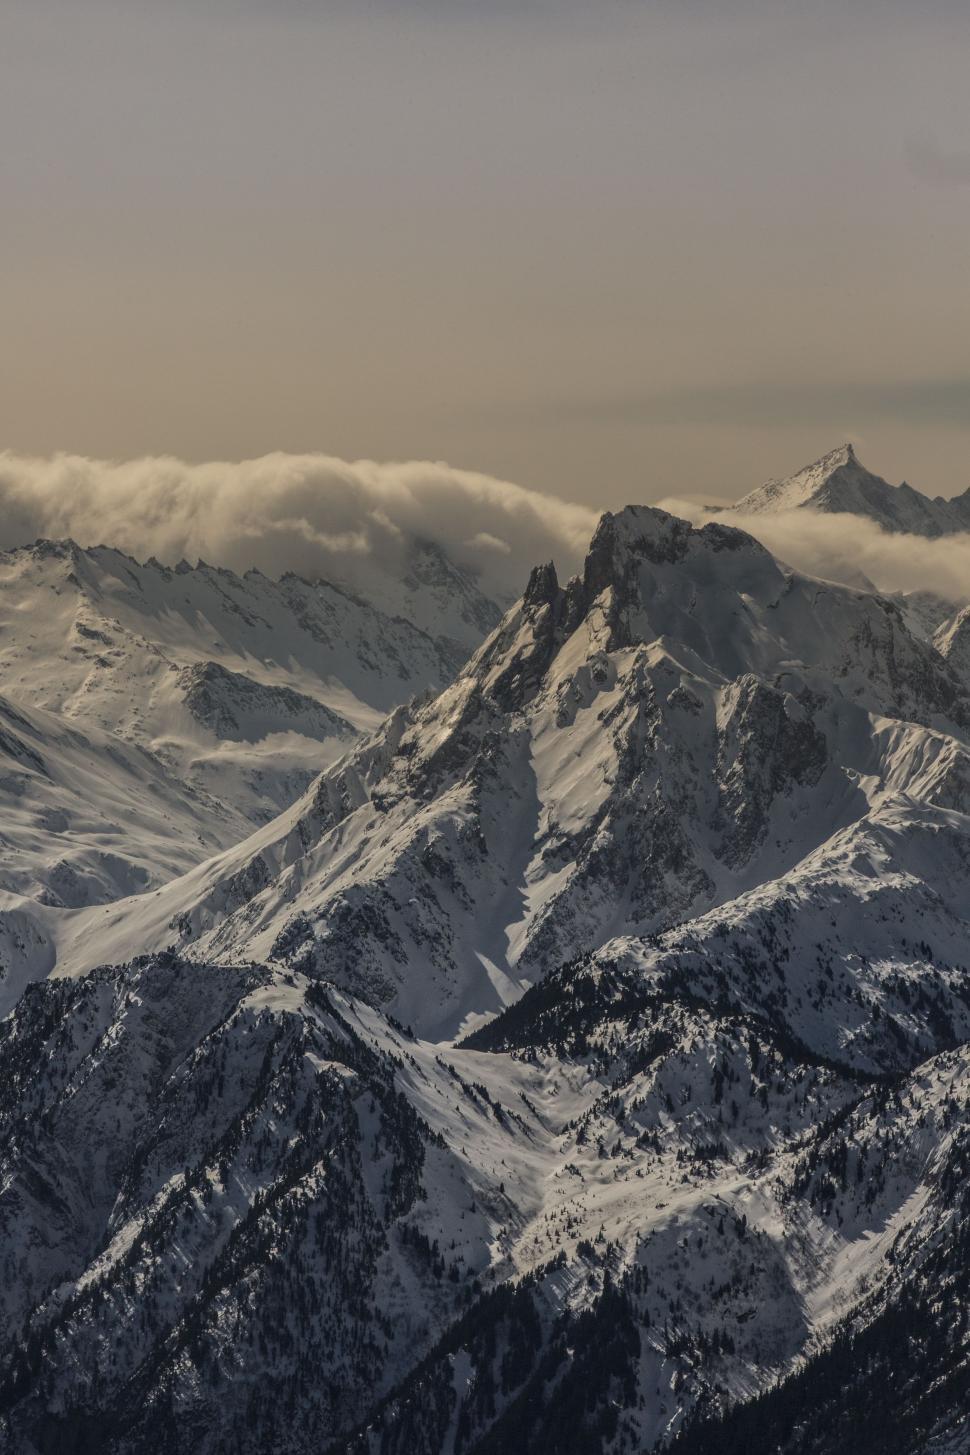 Free Image of Snow-Covered Mountain Range Under Cloudy Sky 